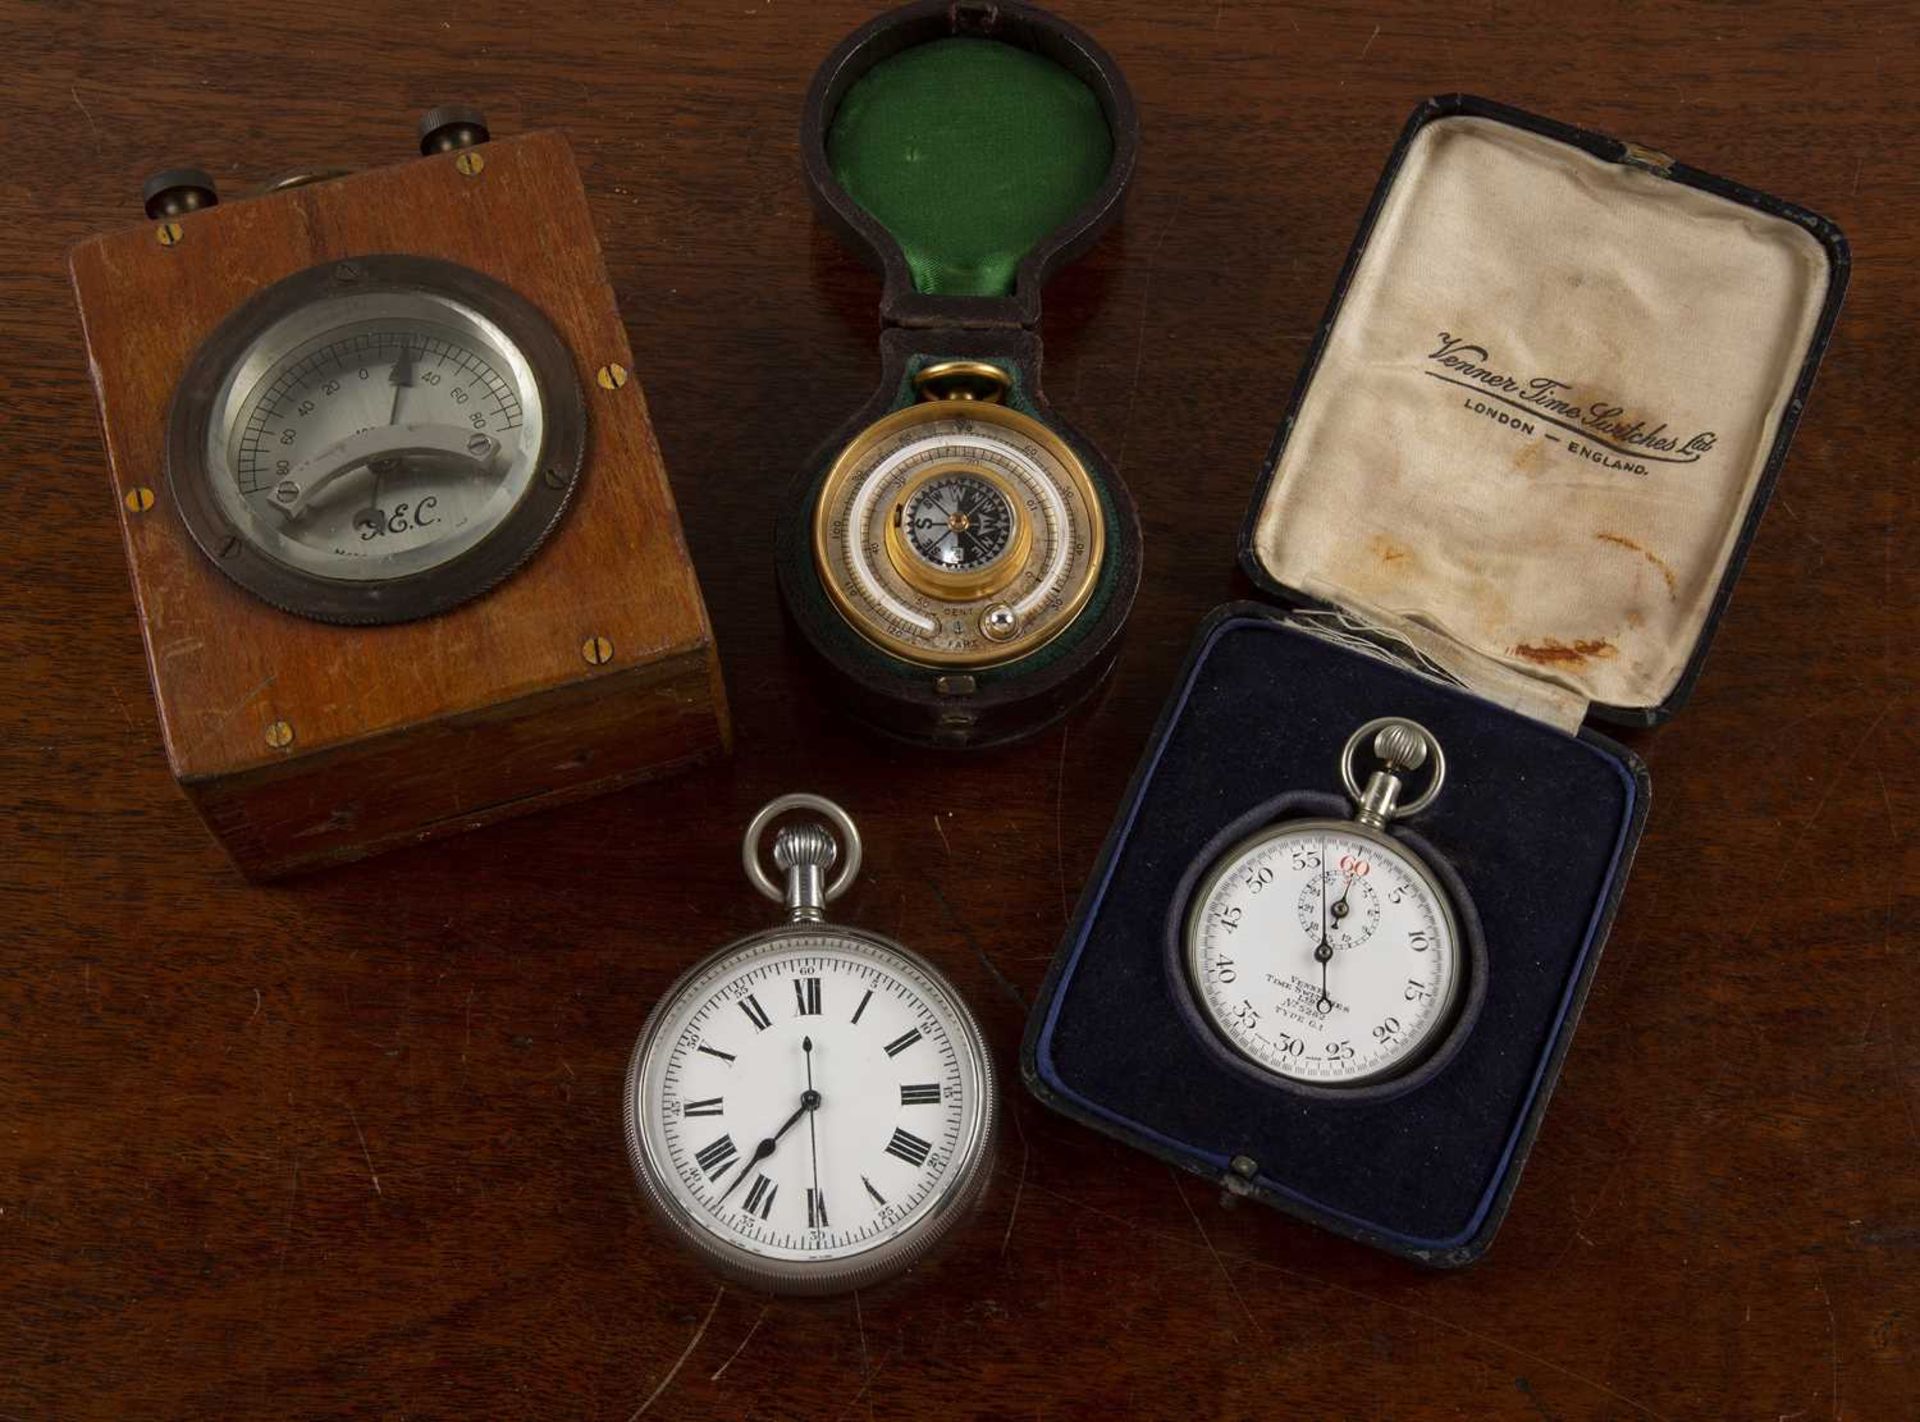 Leather-bound compensated pocket barometer unmarked, 5cm across, together with a cased stopwatch